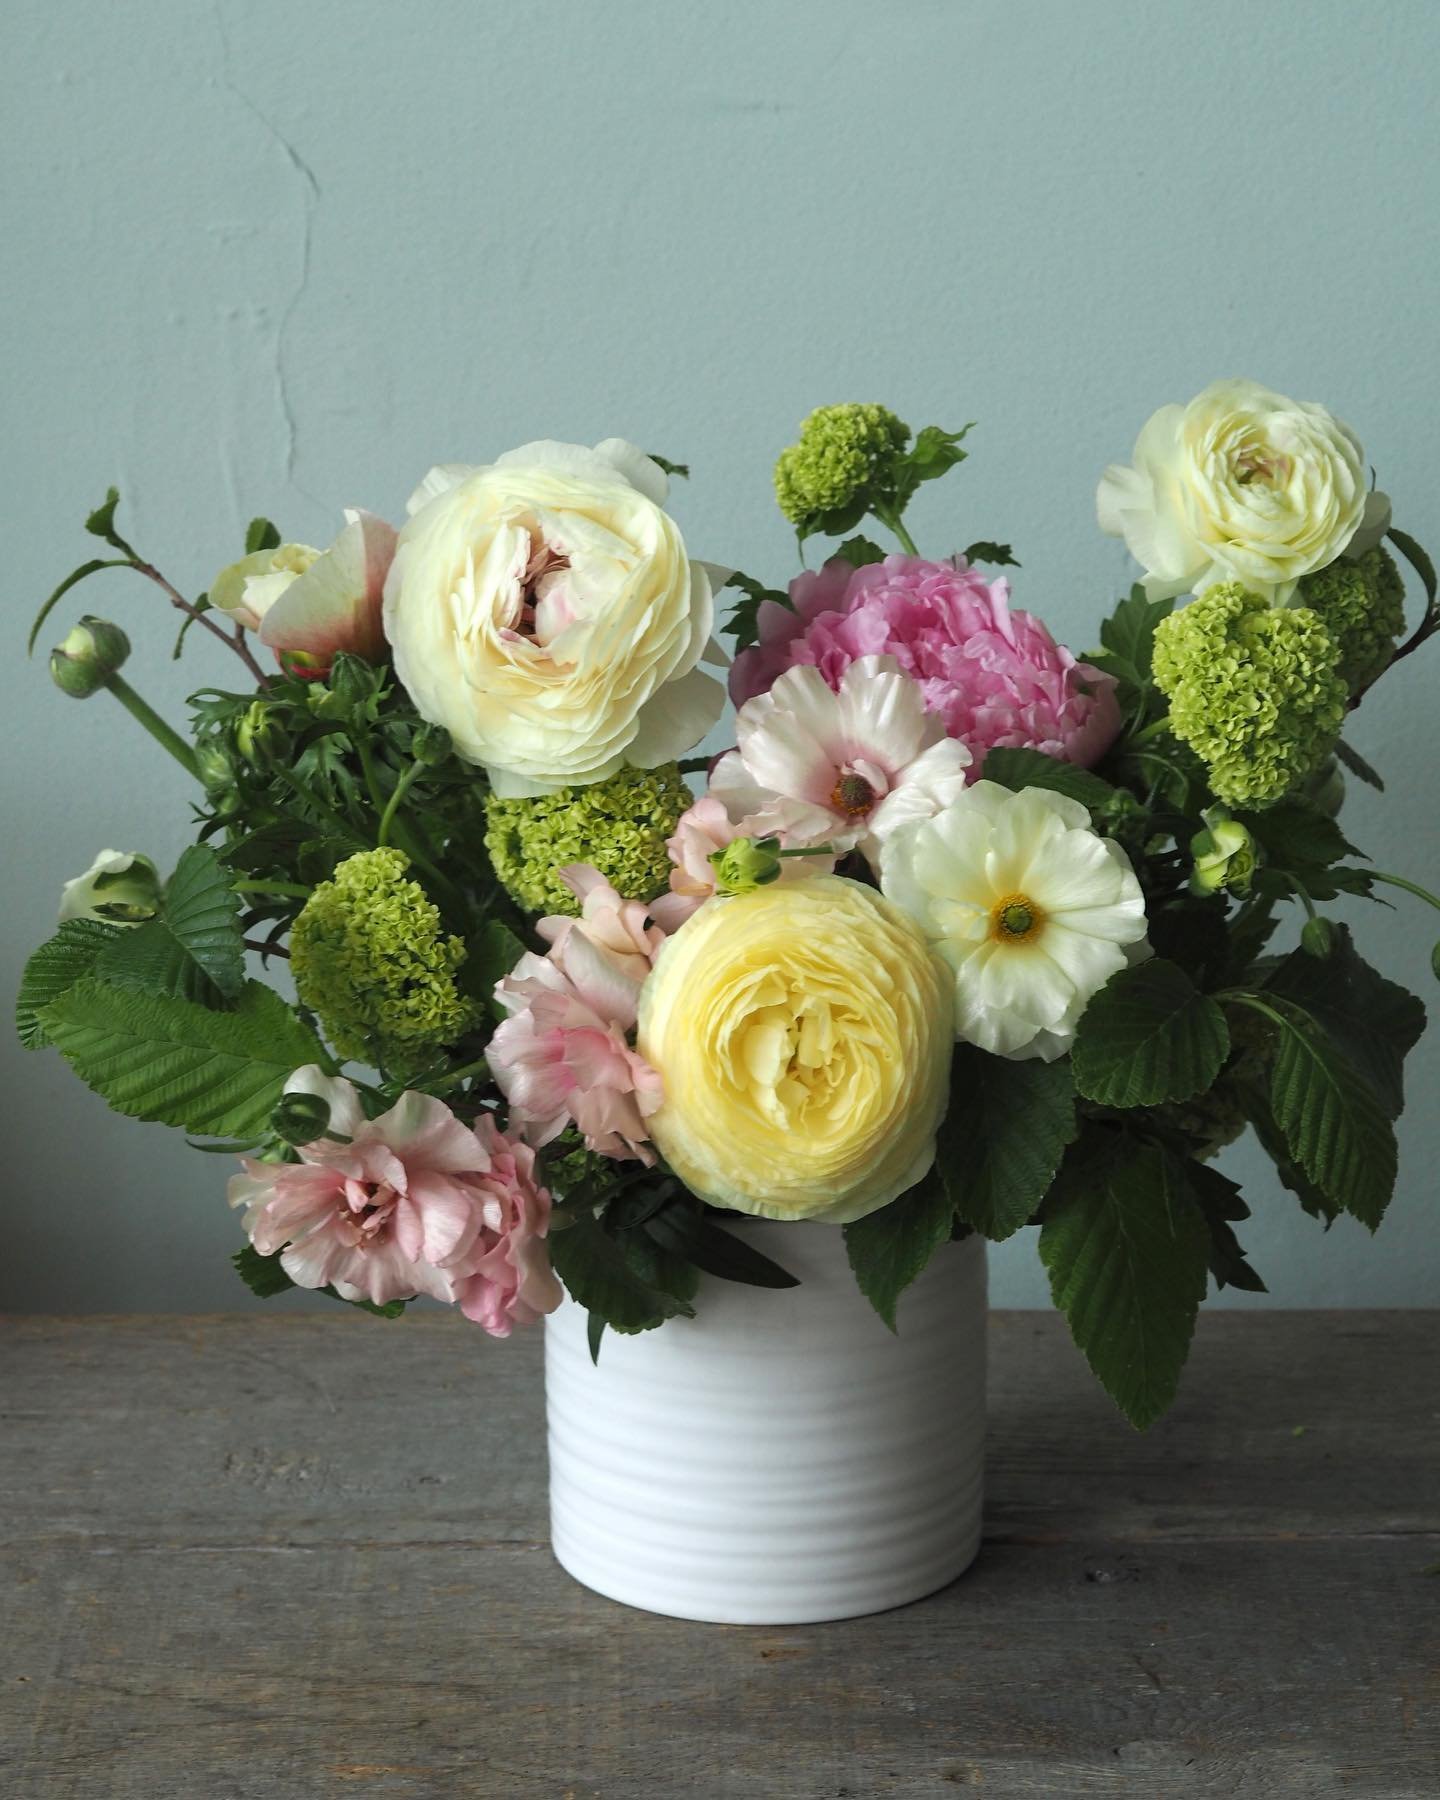 Mother&rsquo;s Day is on the horizon!
We have such gorgeous product arriving daily at the shop.
Be sure to get your orders in Pronto!!

#mothersdayflowers #peonies #ranunculus #arrangement #springflowers #mothersdayarrangement #pastelflowers #vancouv